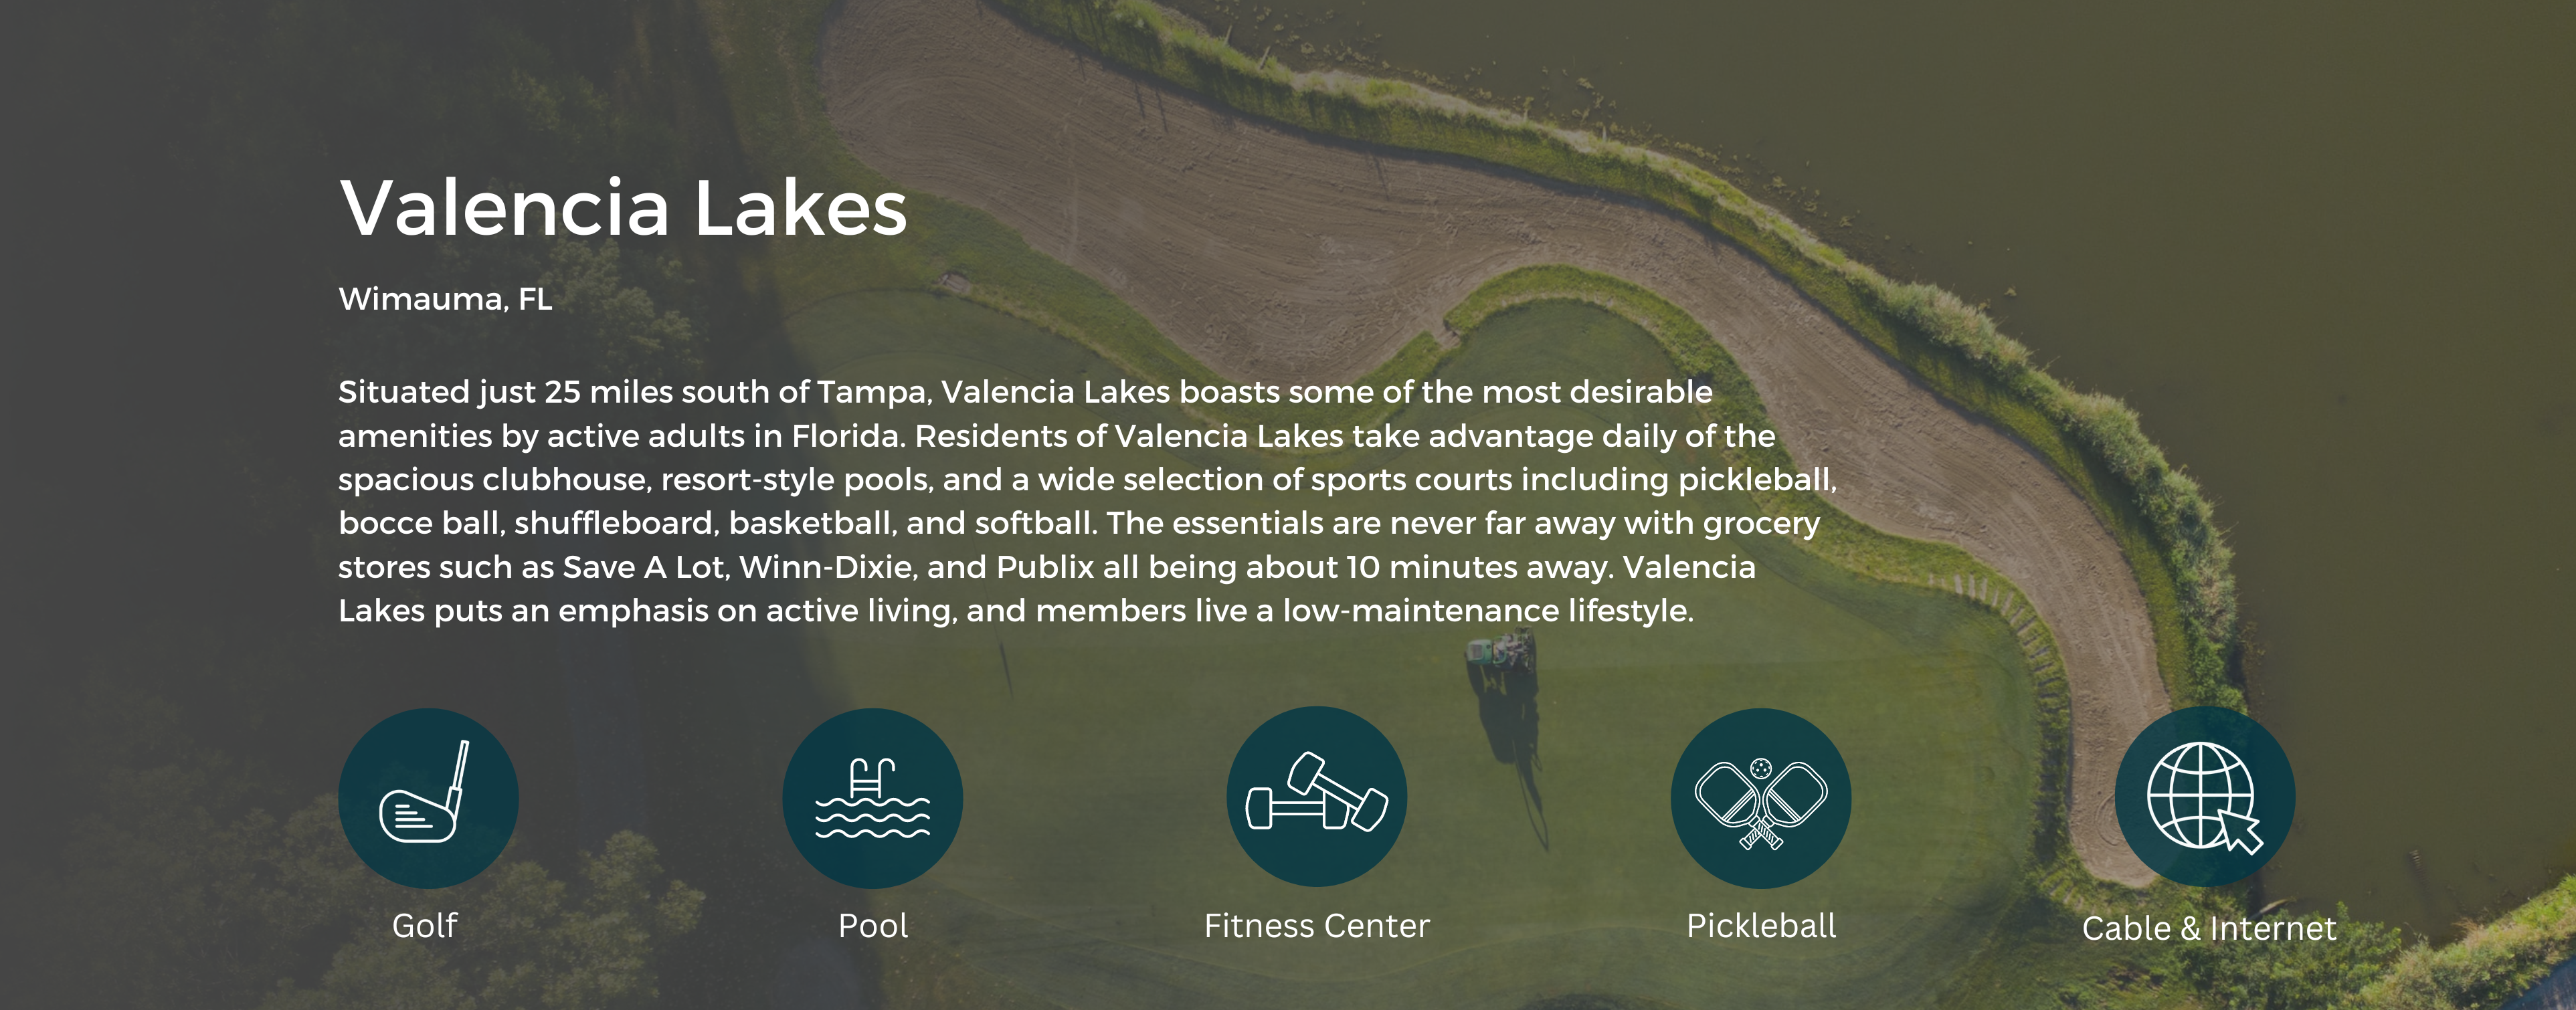 Icons that show Golf, Pool, Fitness Center, and Pickleball. Background image is an aerial view of a golf course.